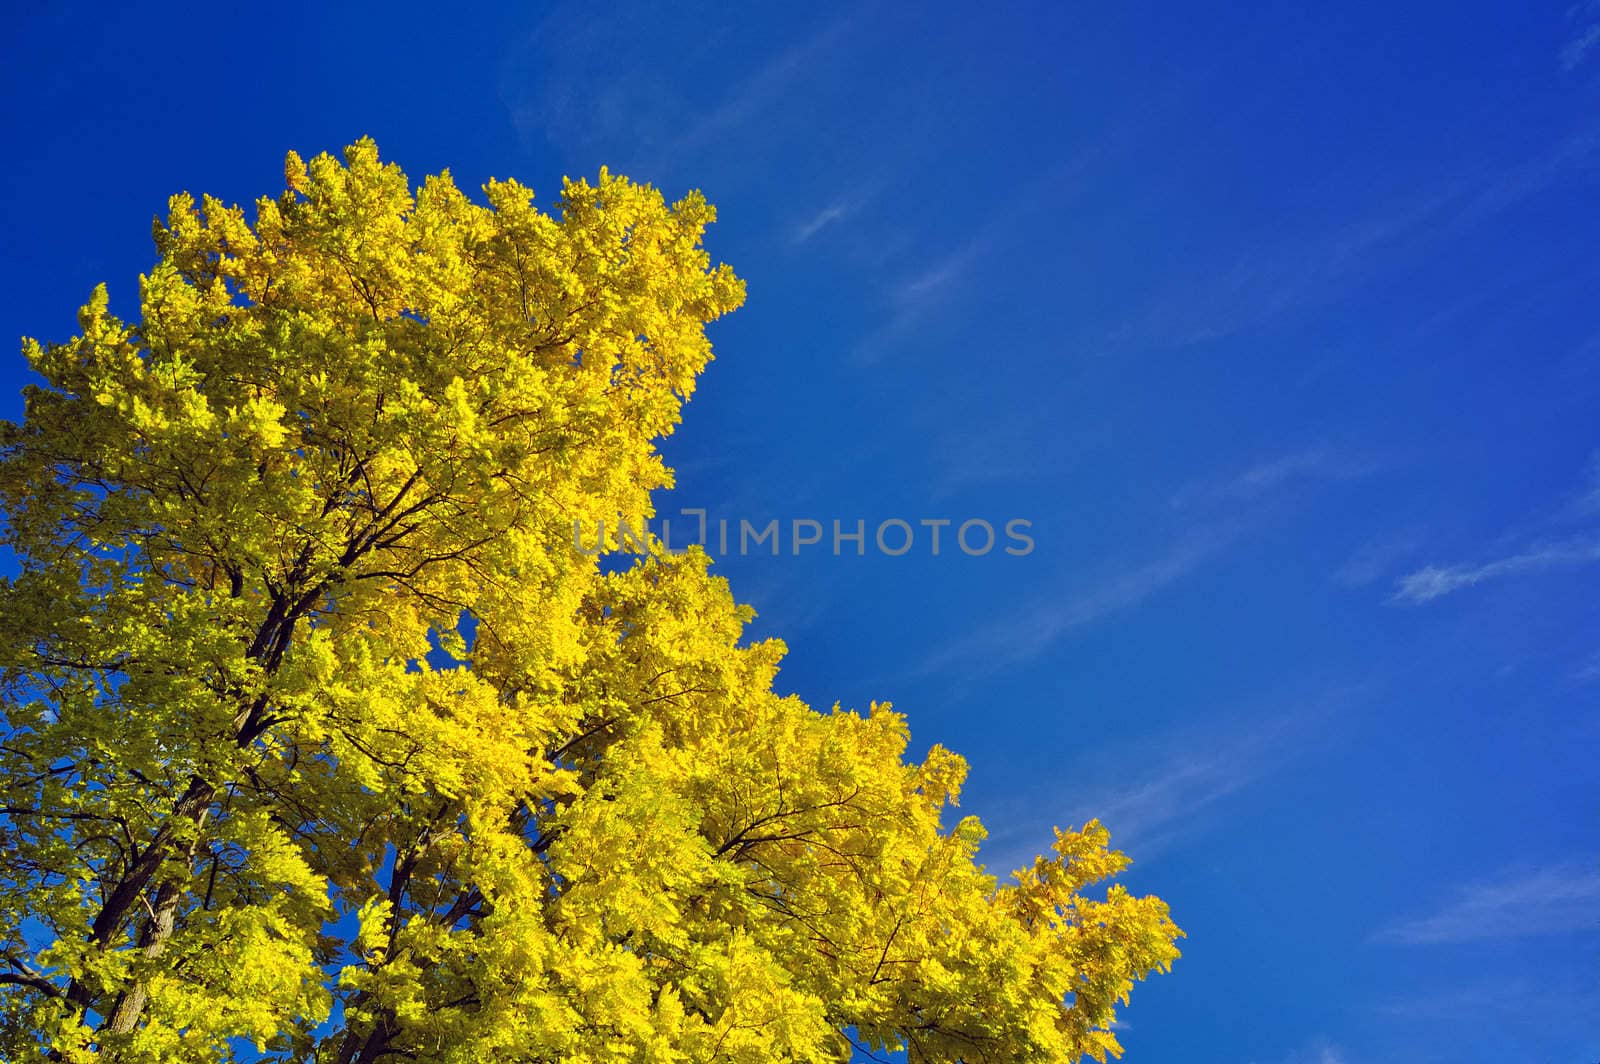 A tree in autumn, against a blue sky, streaked with cirrus clouds. Space for text in the sky.